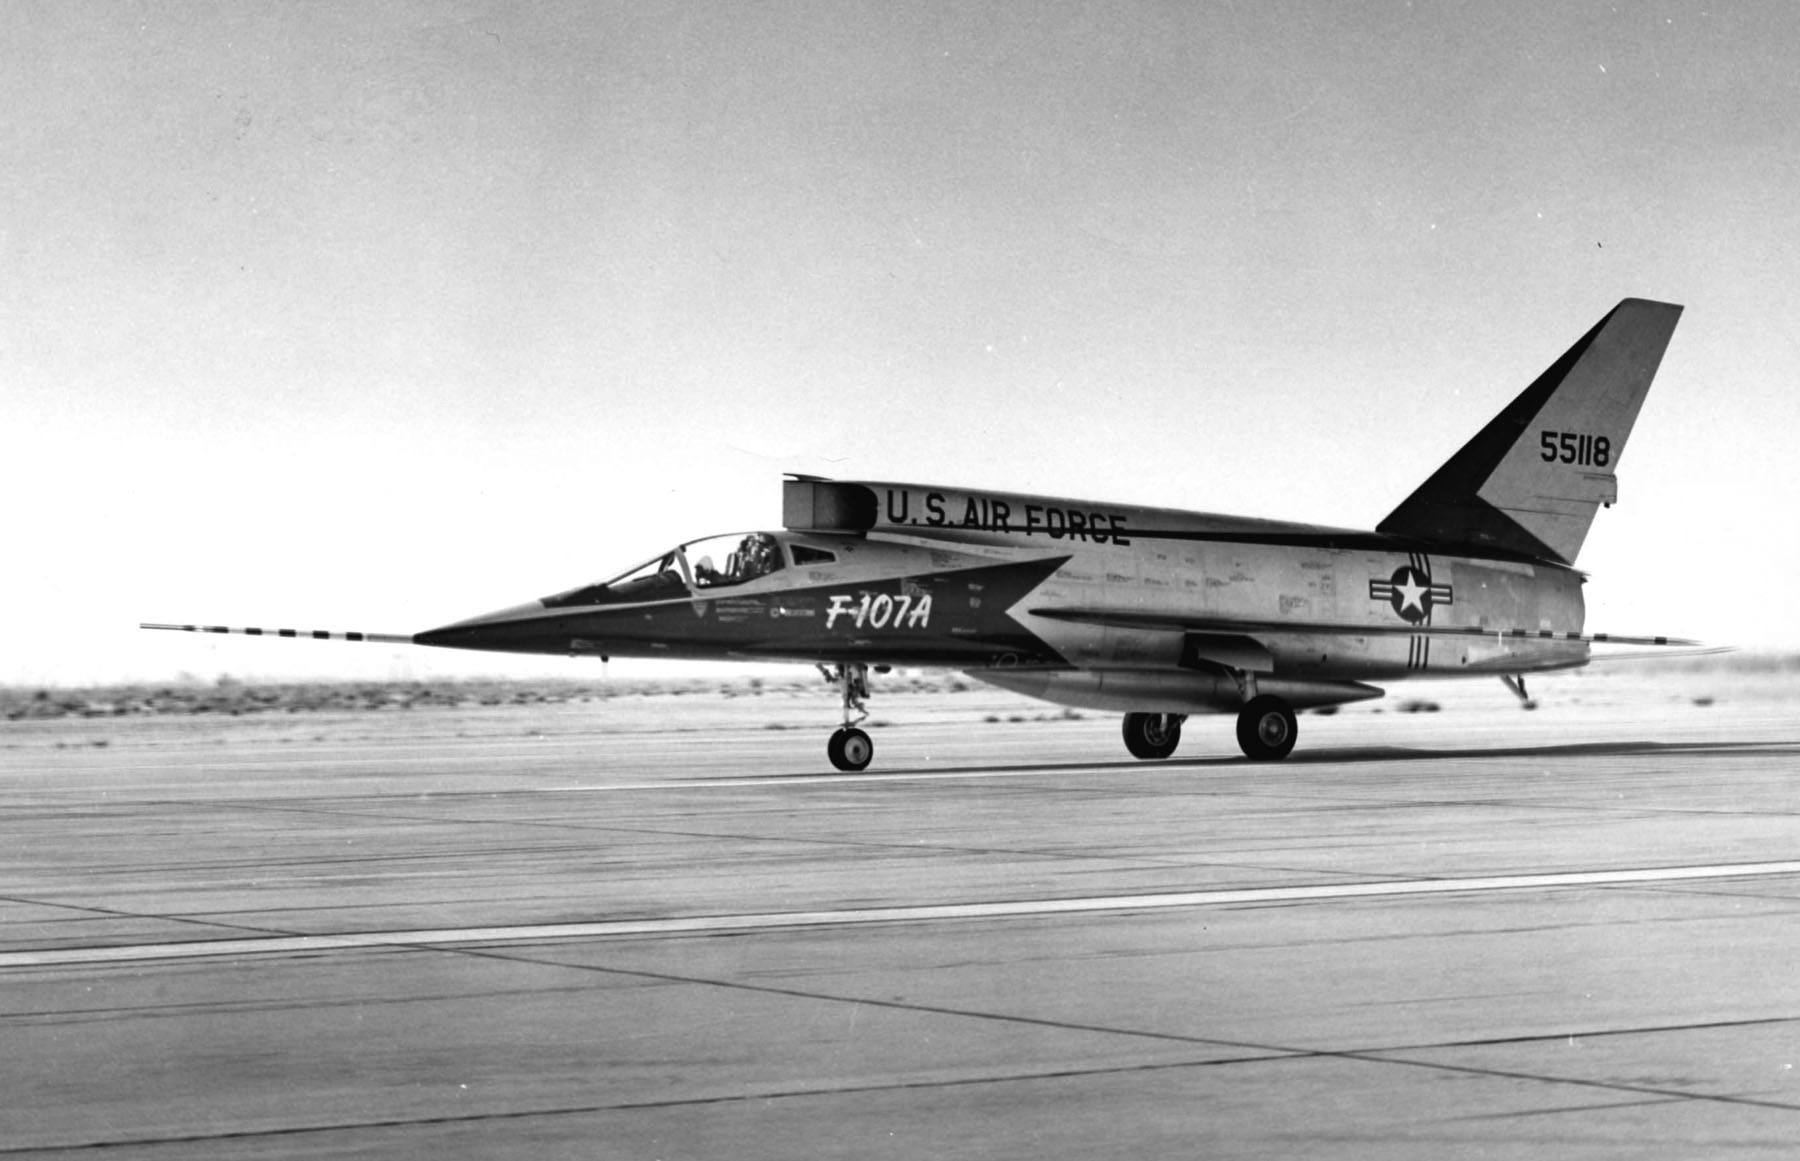 North American Aviation North American Aviation F-107A S/N 55-5118 rolling out at Edwards Air Force base. (U.S. Air Force)